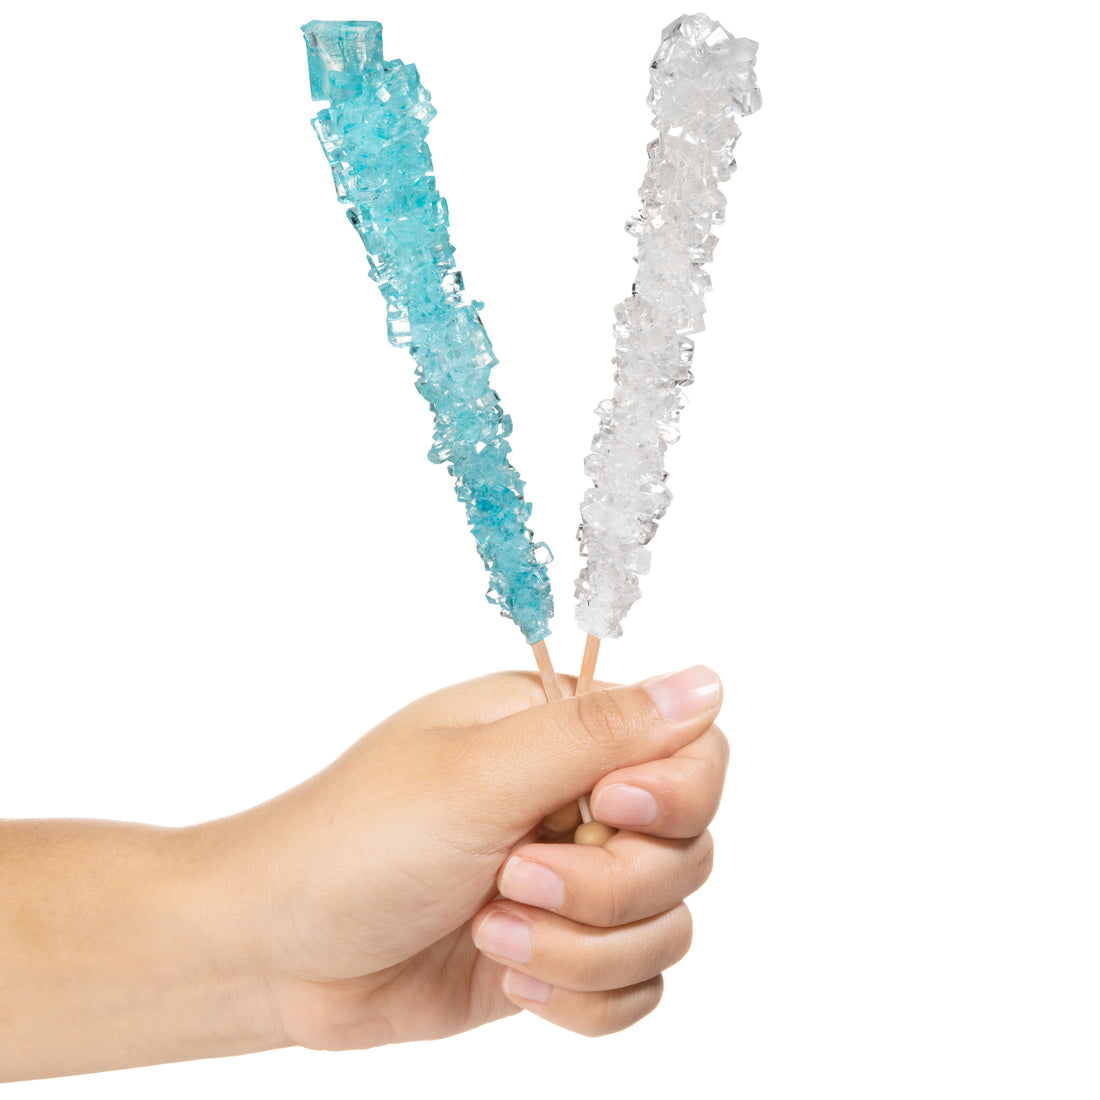 Light Blue & White Rock Candy Crystal Sticks - Cotton Candy and Original Sugar Flavors